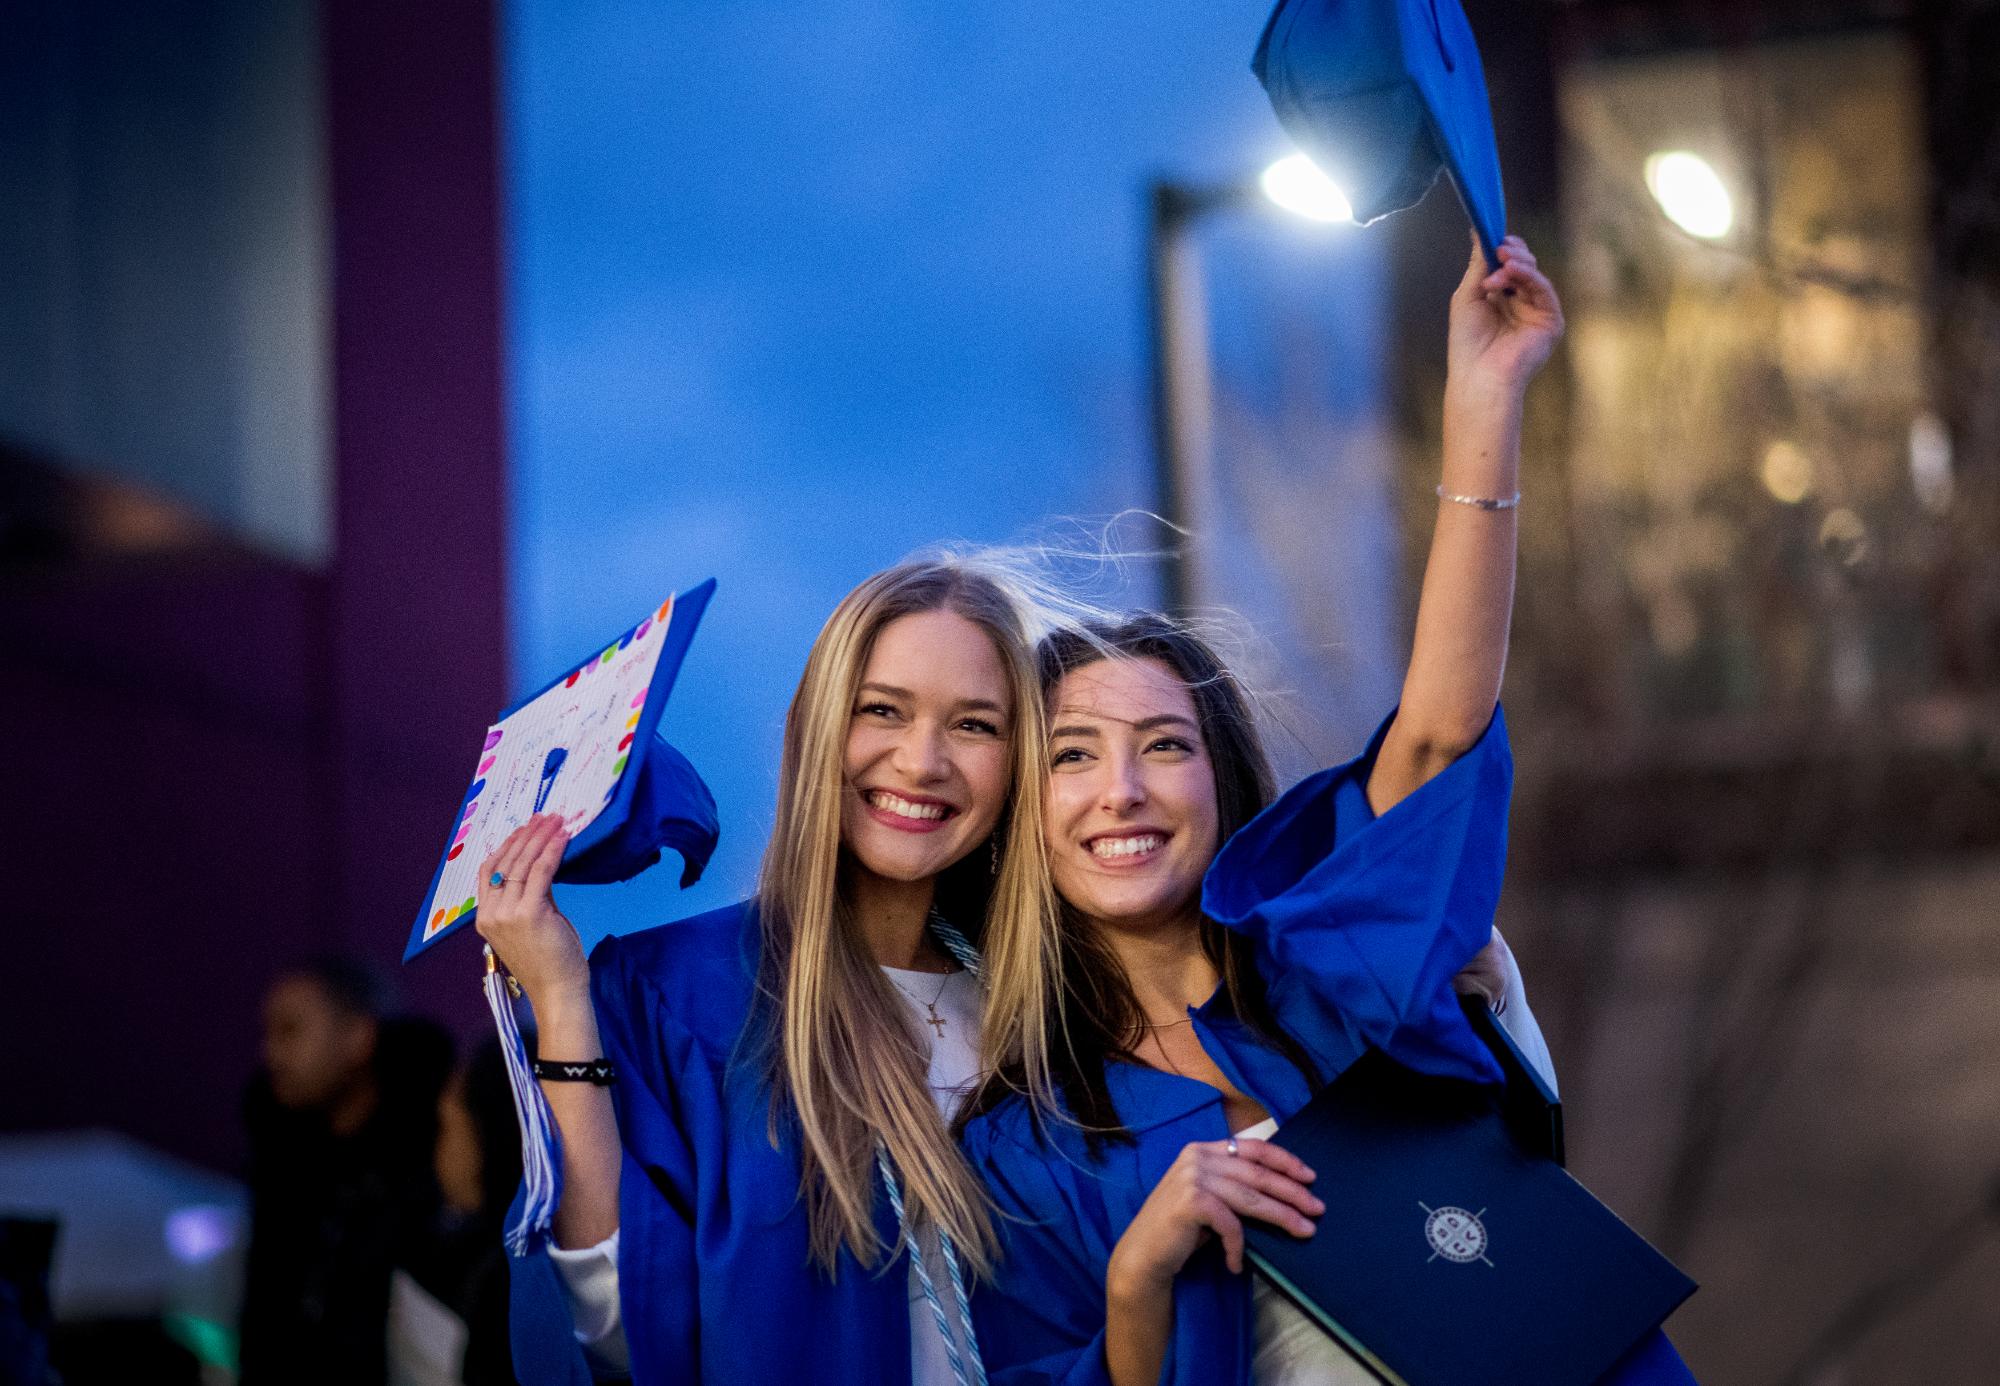 Two graduates wearing blue caps and smiling and celebrating at Commencement